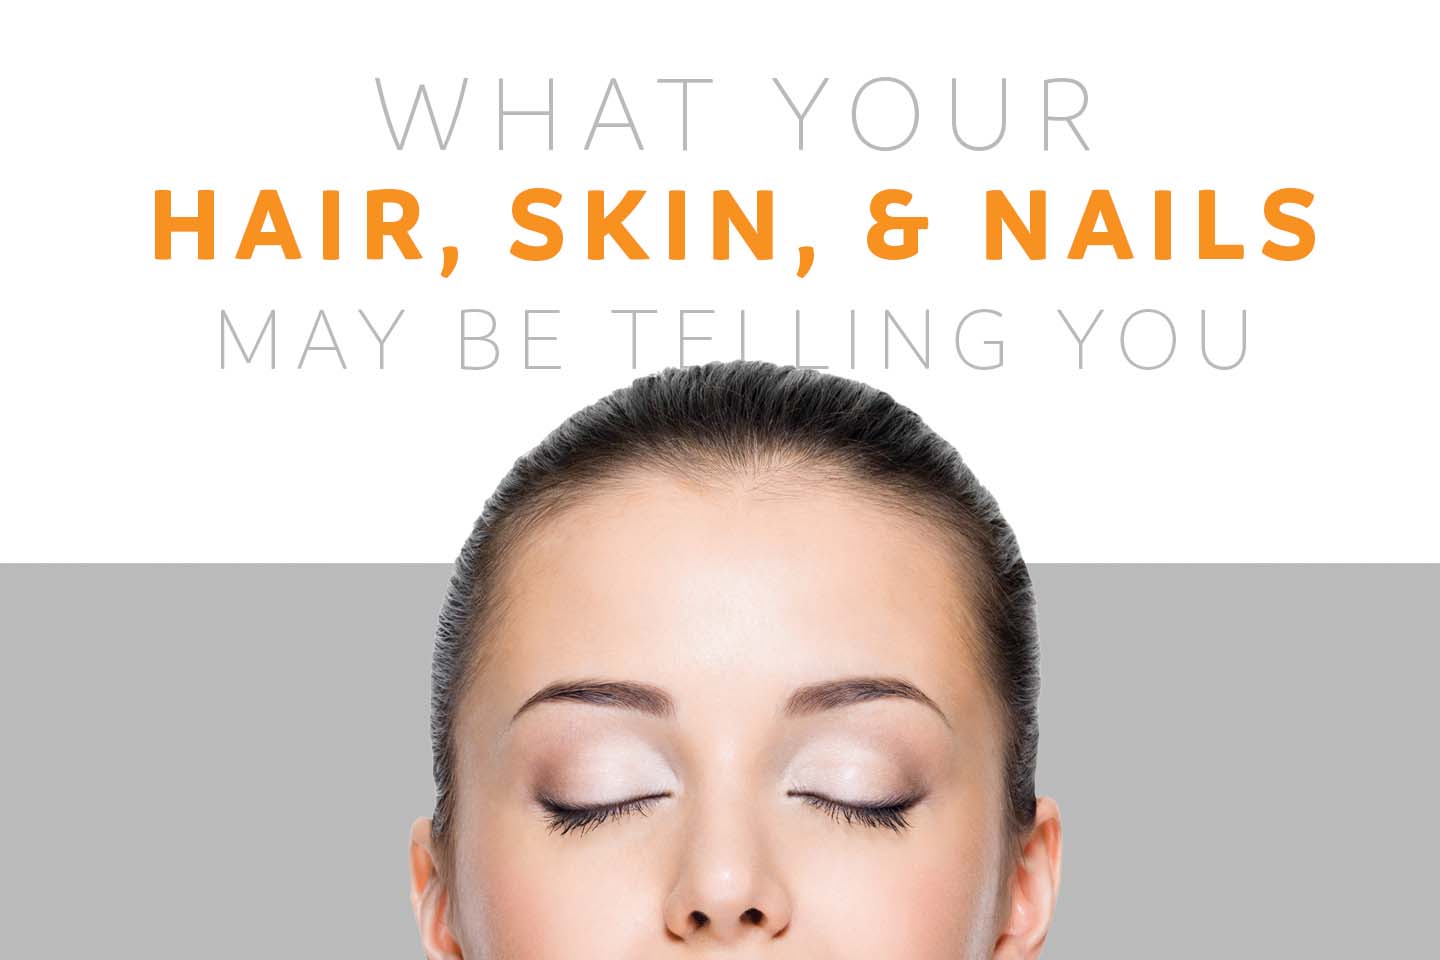 what your hair, skin, and nails may be telling you chattanooga